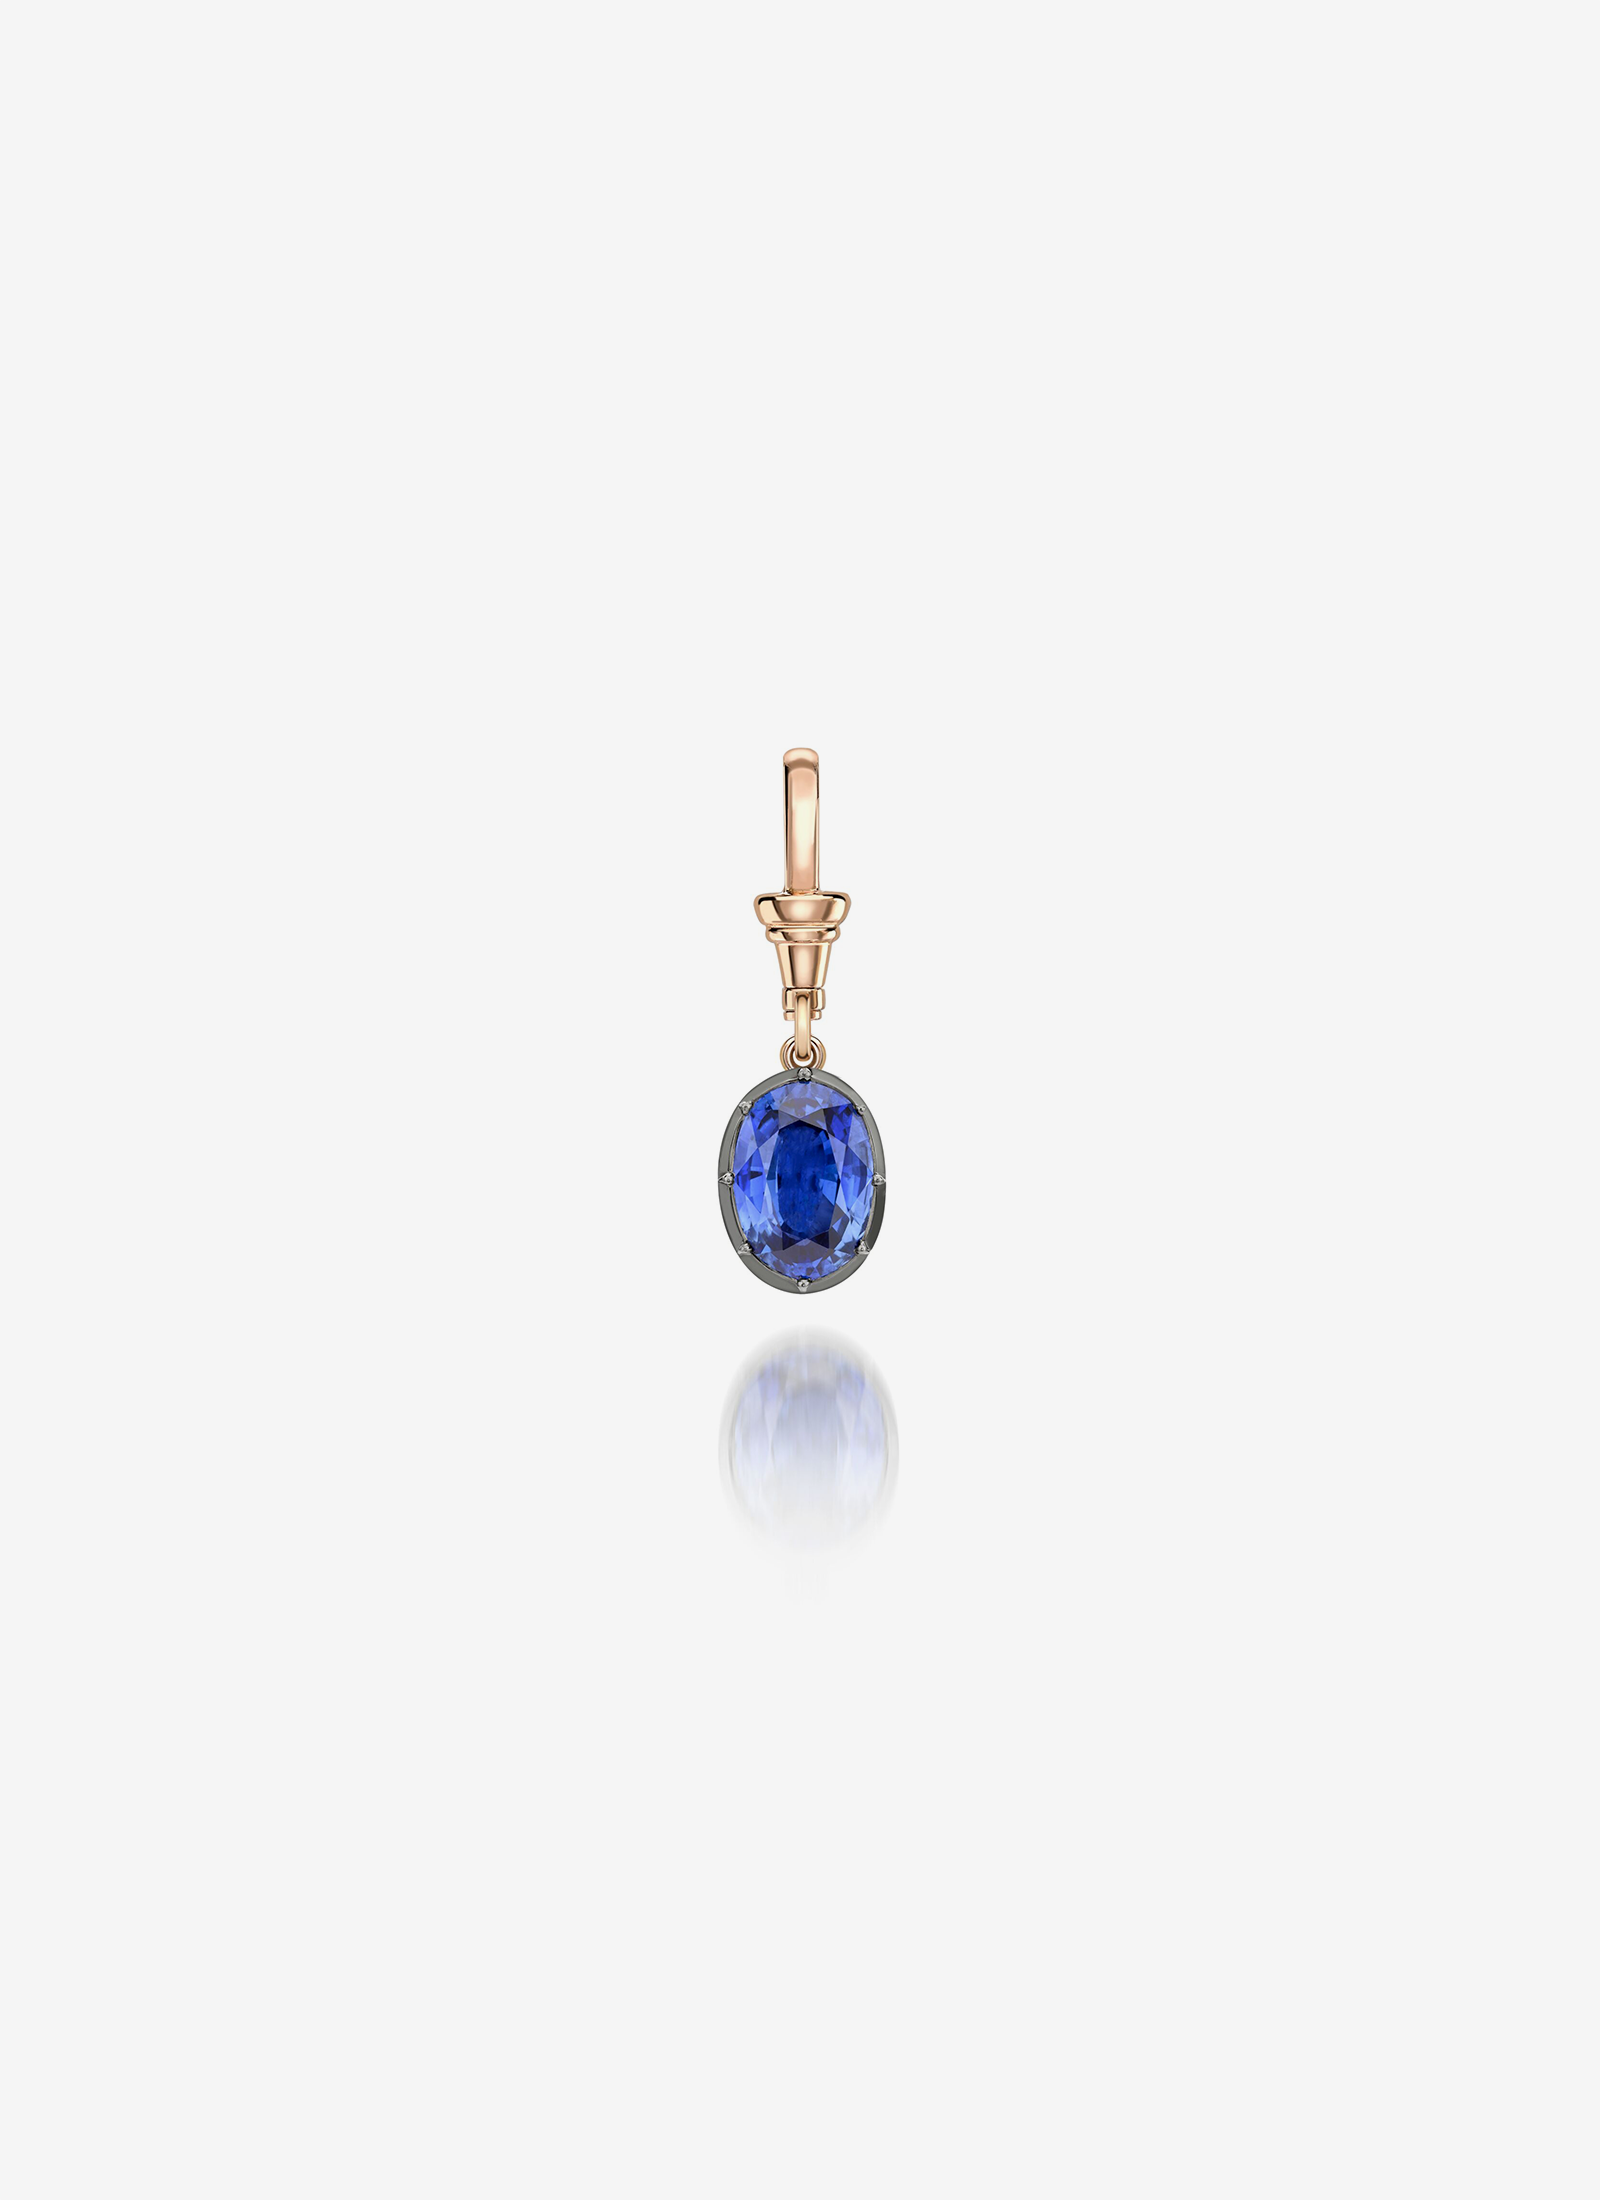 Ball n Chain Pendant - Sapphire Oval Shaped 4.53ct